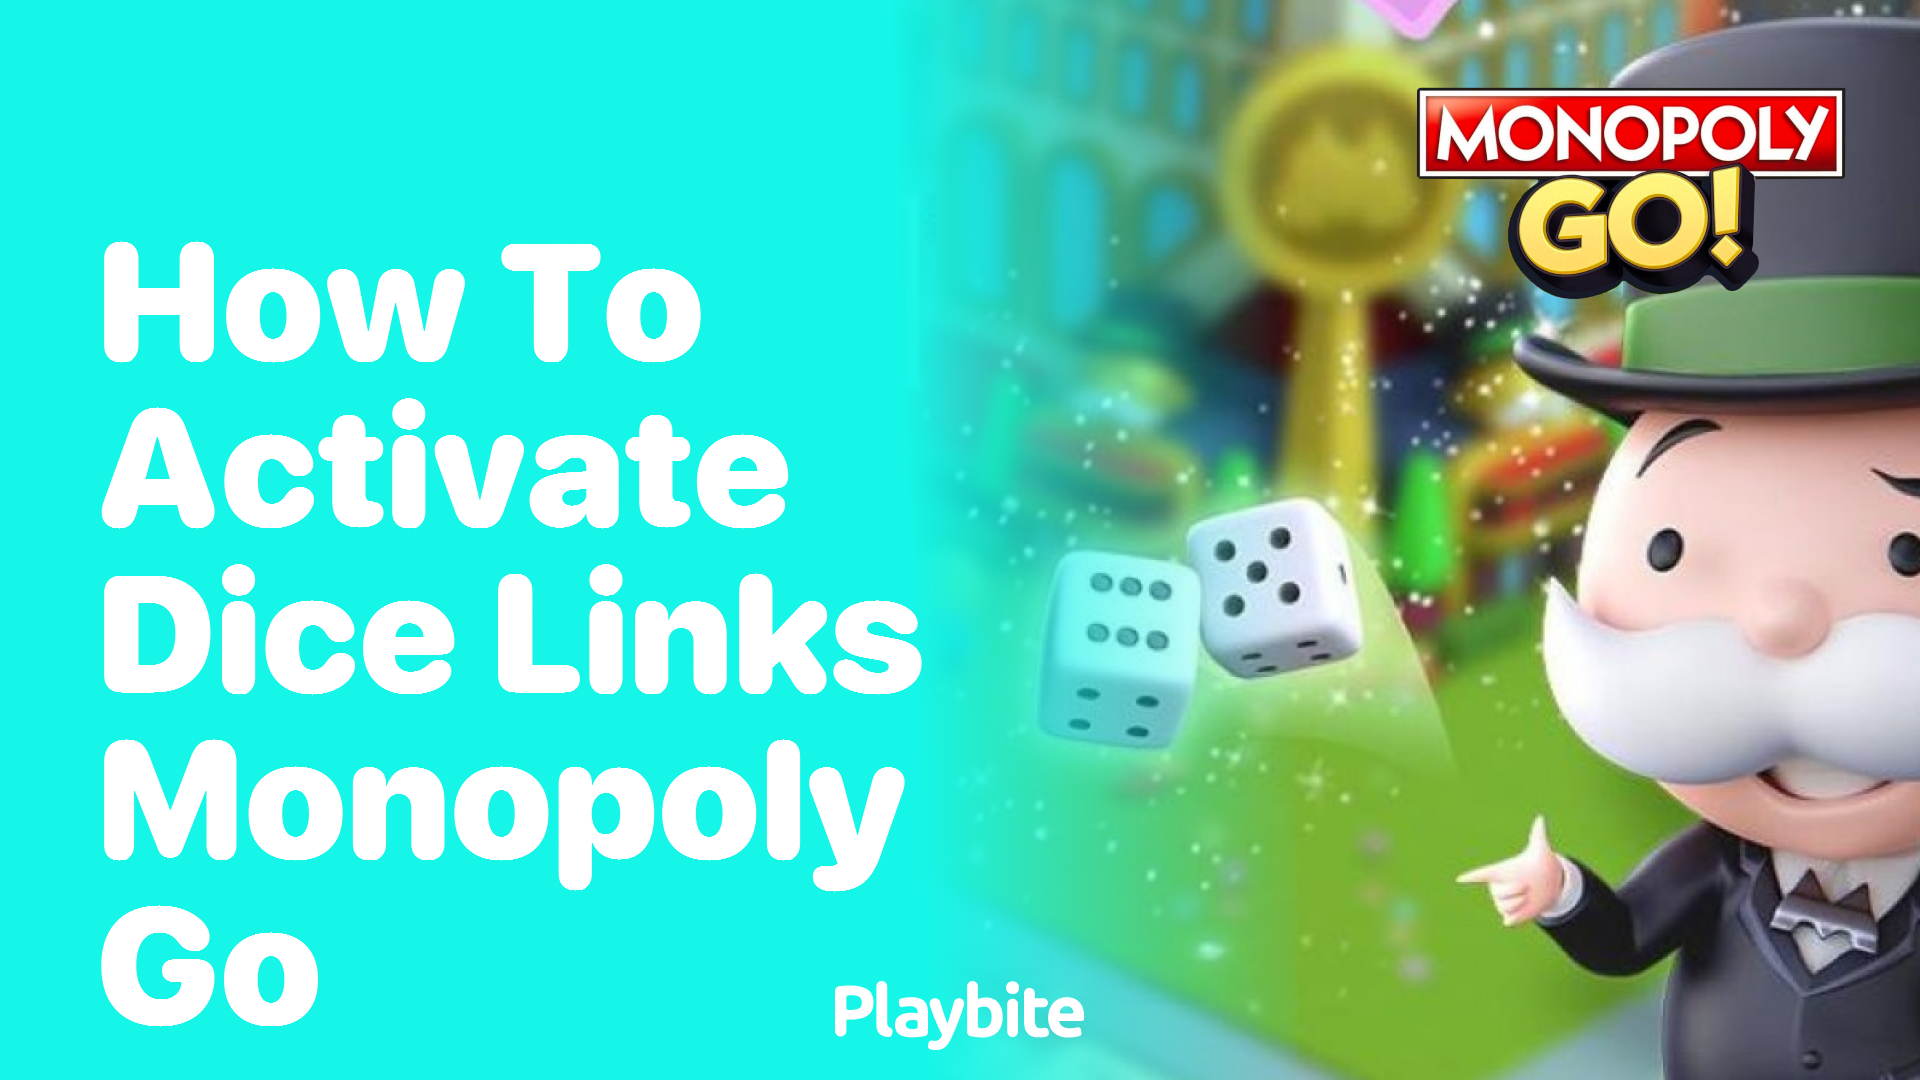 How to Activate Dice Links in Monopoly Go